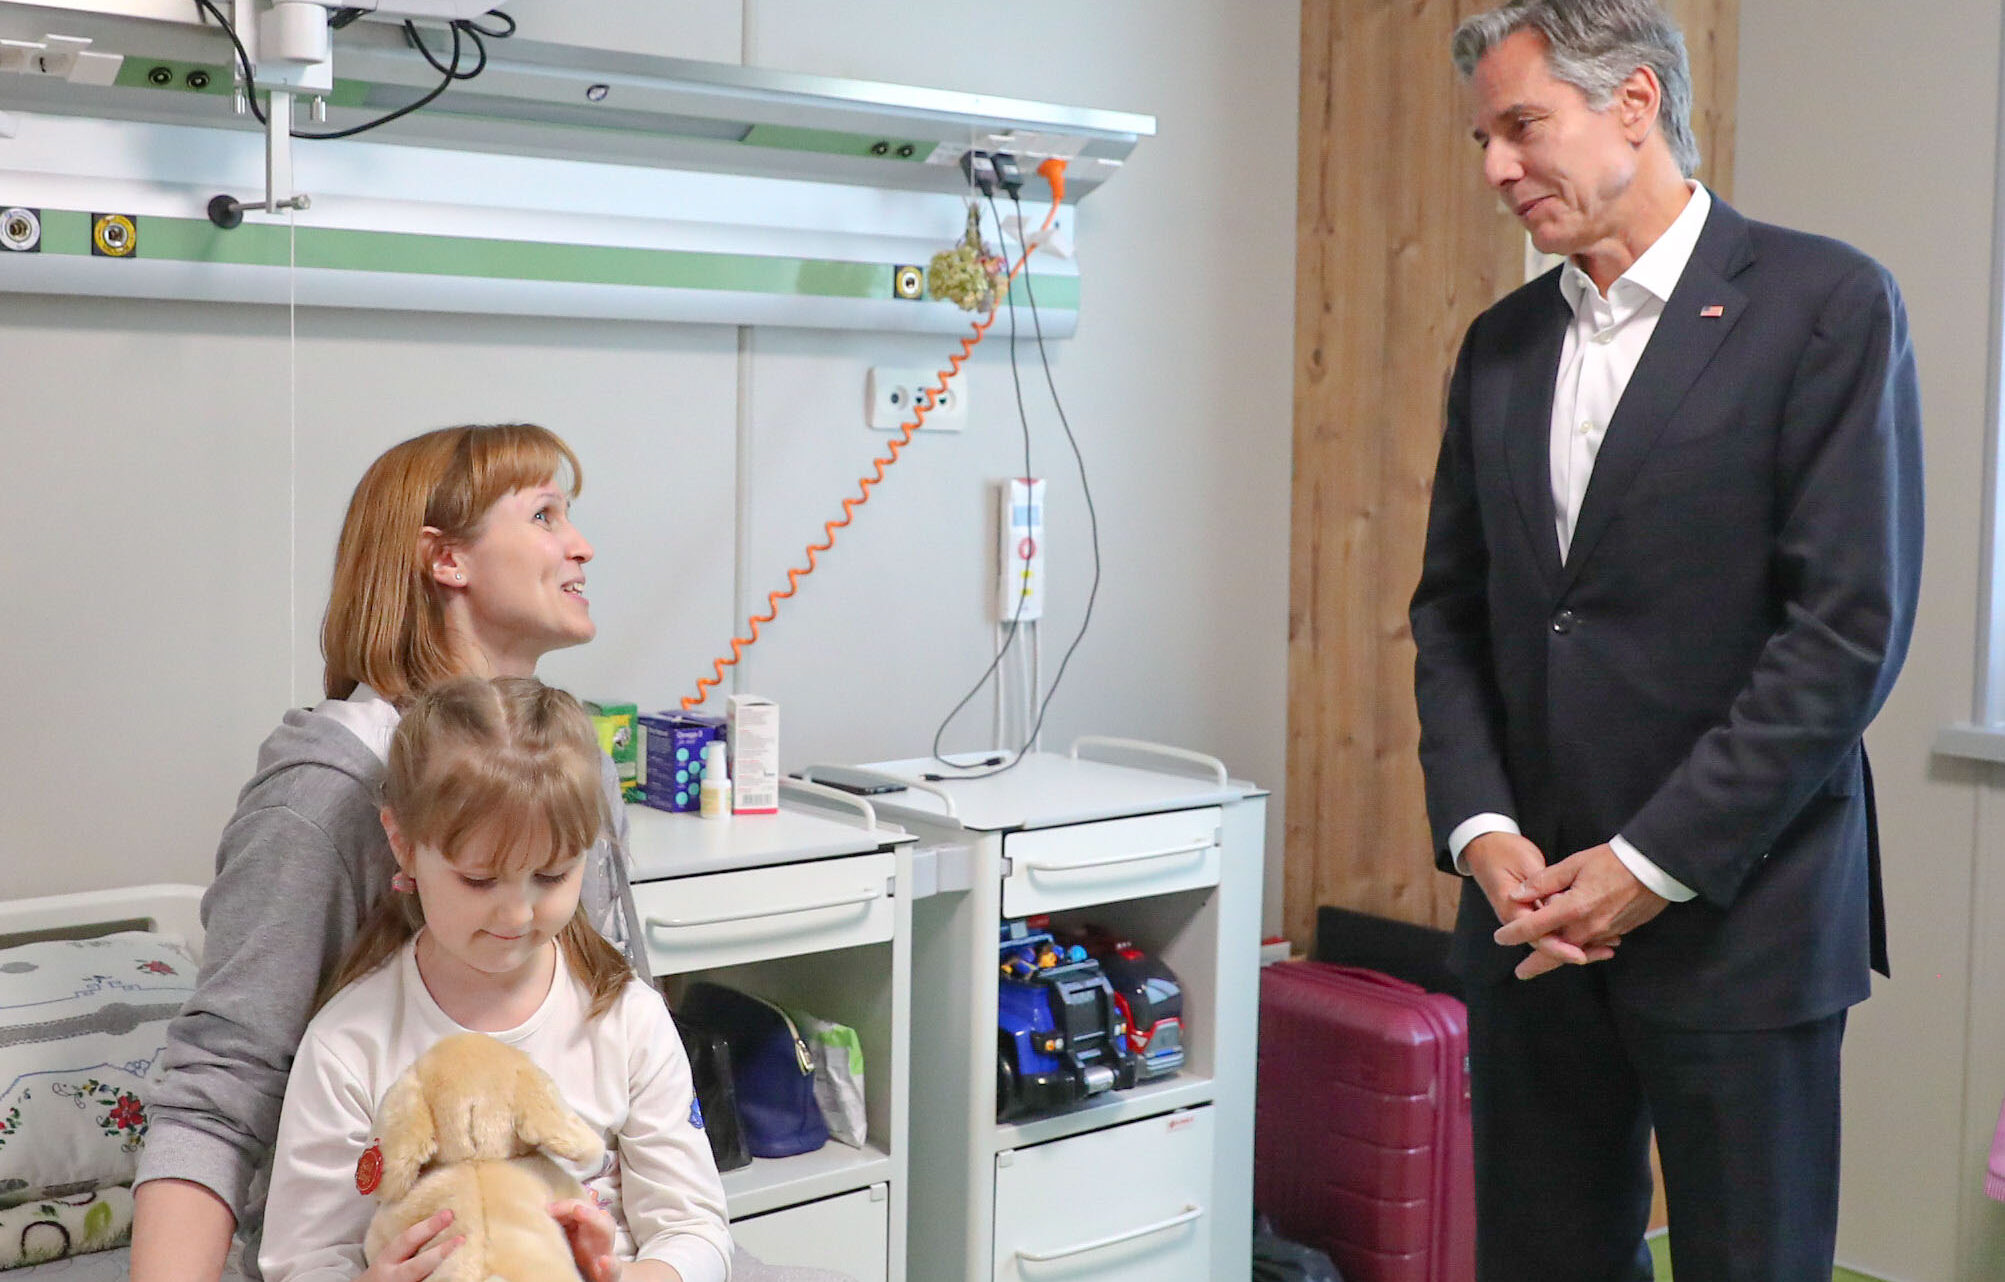 Secretary Blinken visits a family receiving care at a hospital in Ukraine in September 2022. He is standing and speaking with an adult and a child who are seated on a hospital bed.